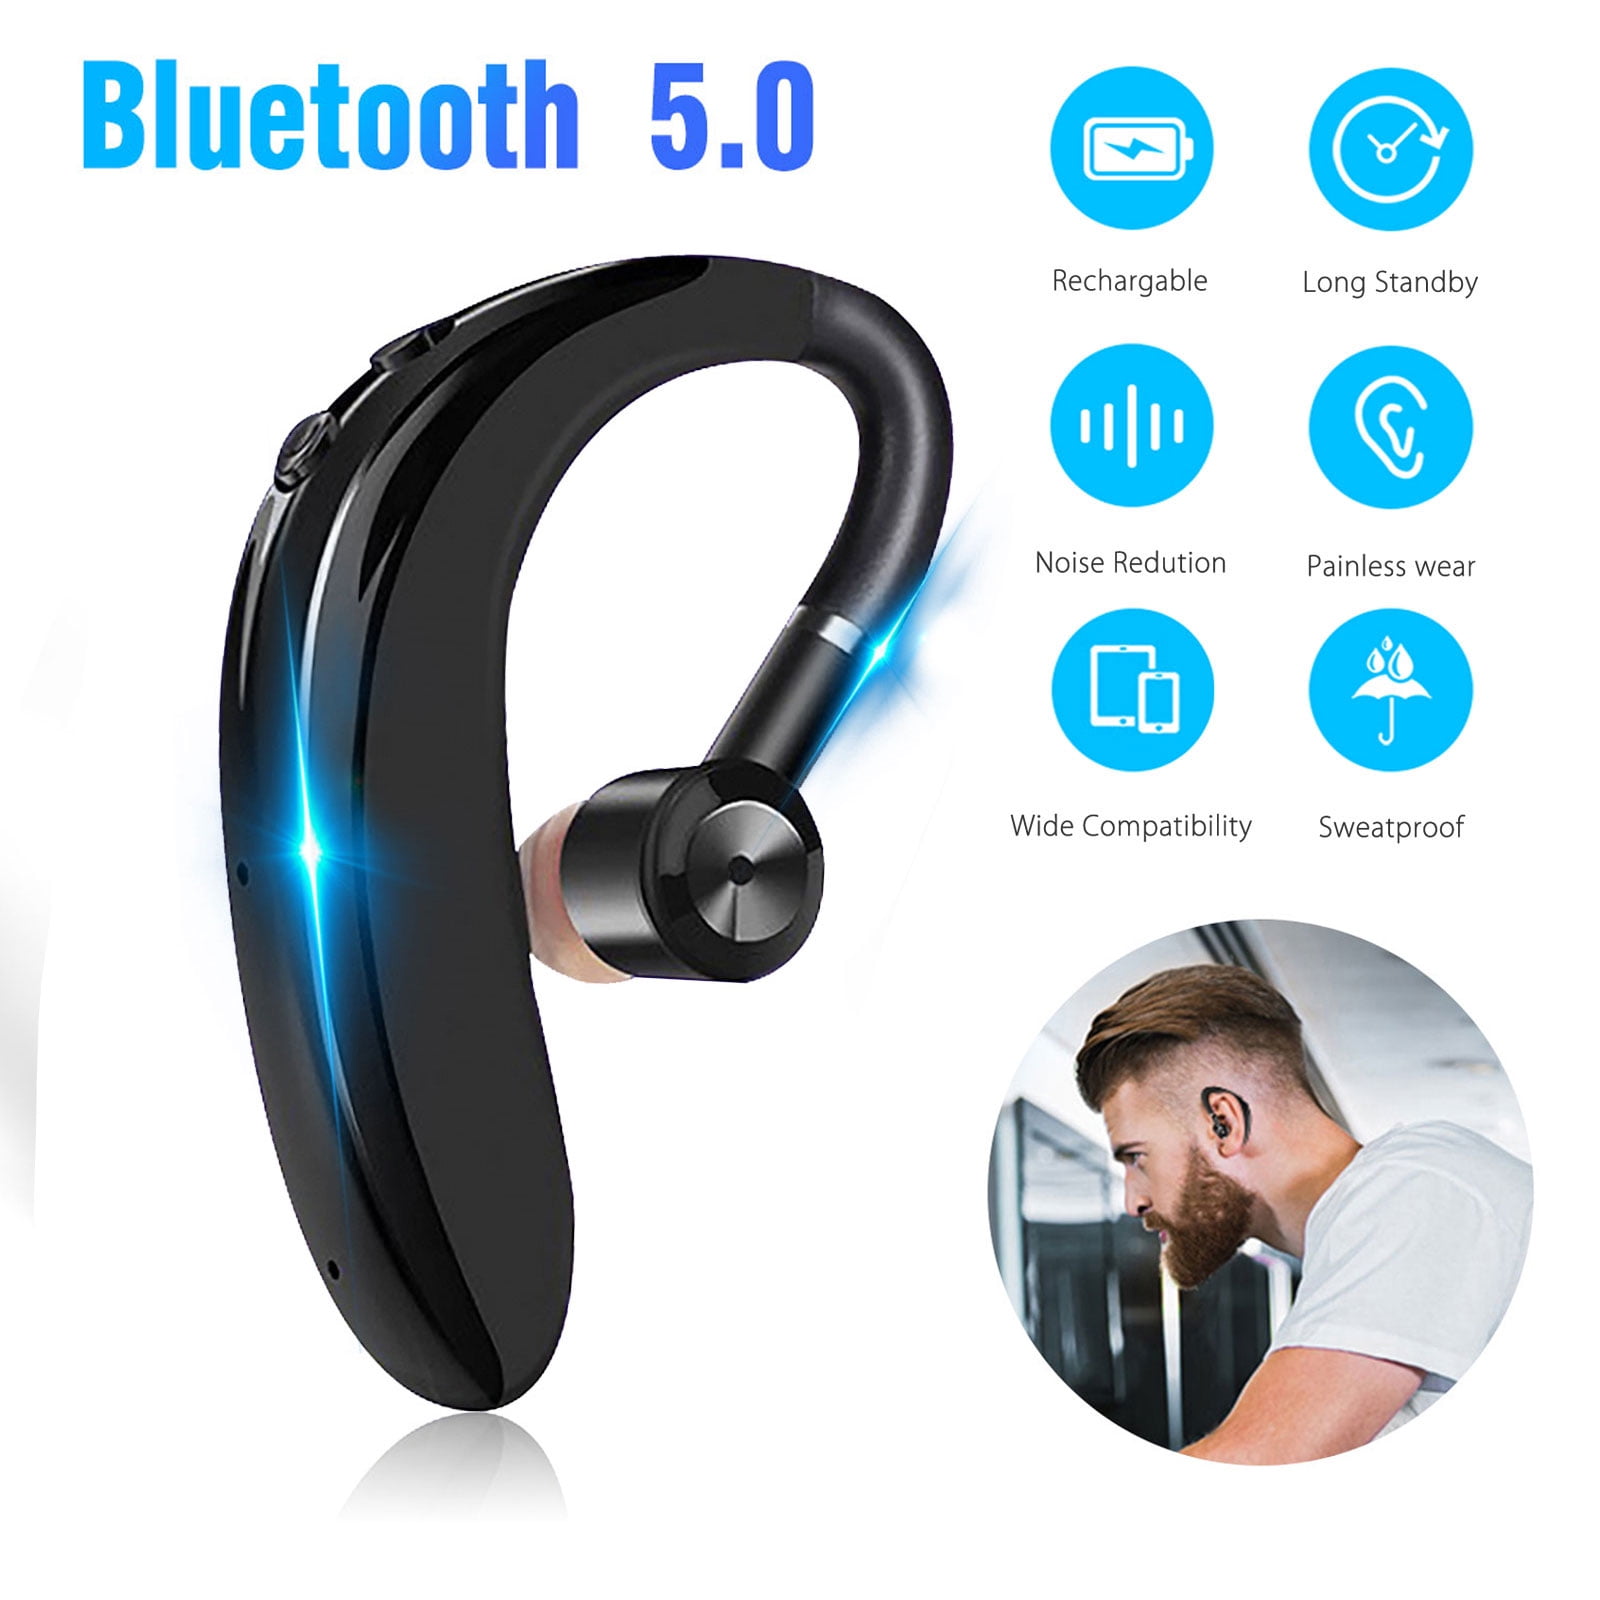 wireless bluetooth earbuds 5.0 compatible with both iPhone And Samsung Phones 